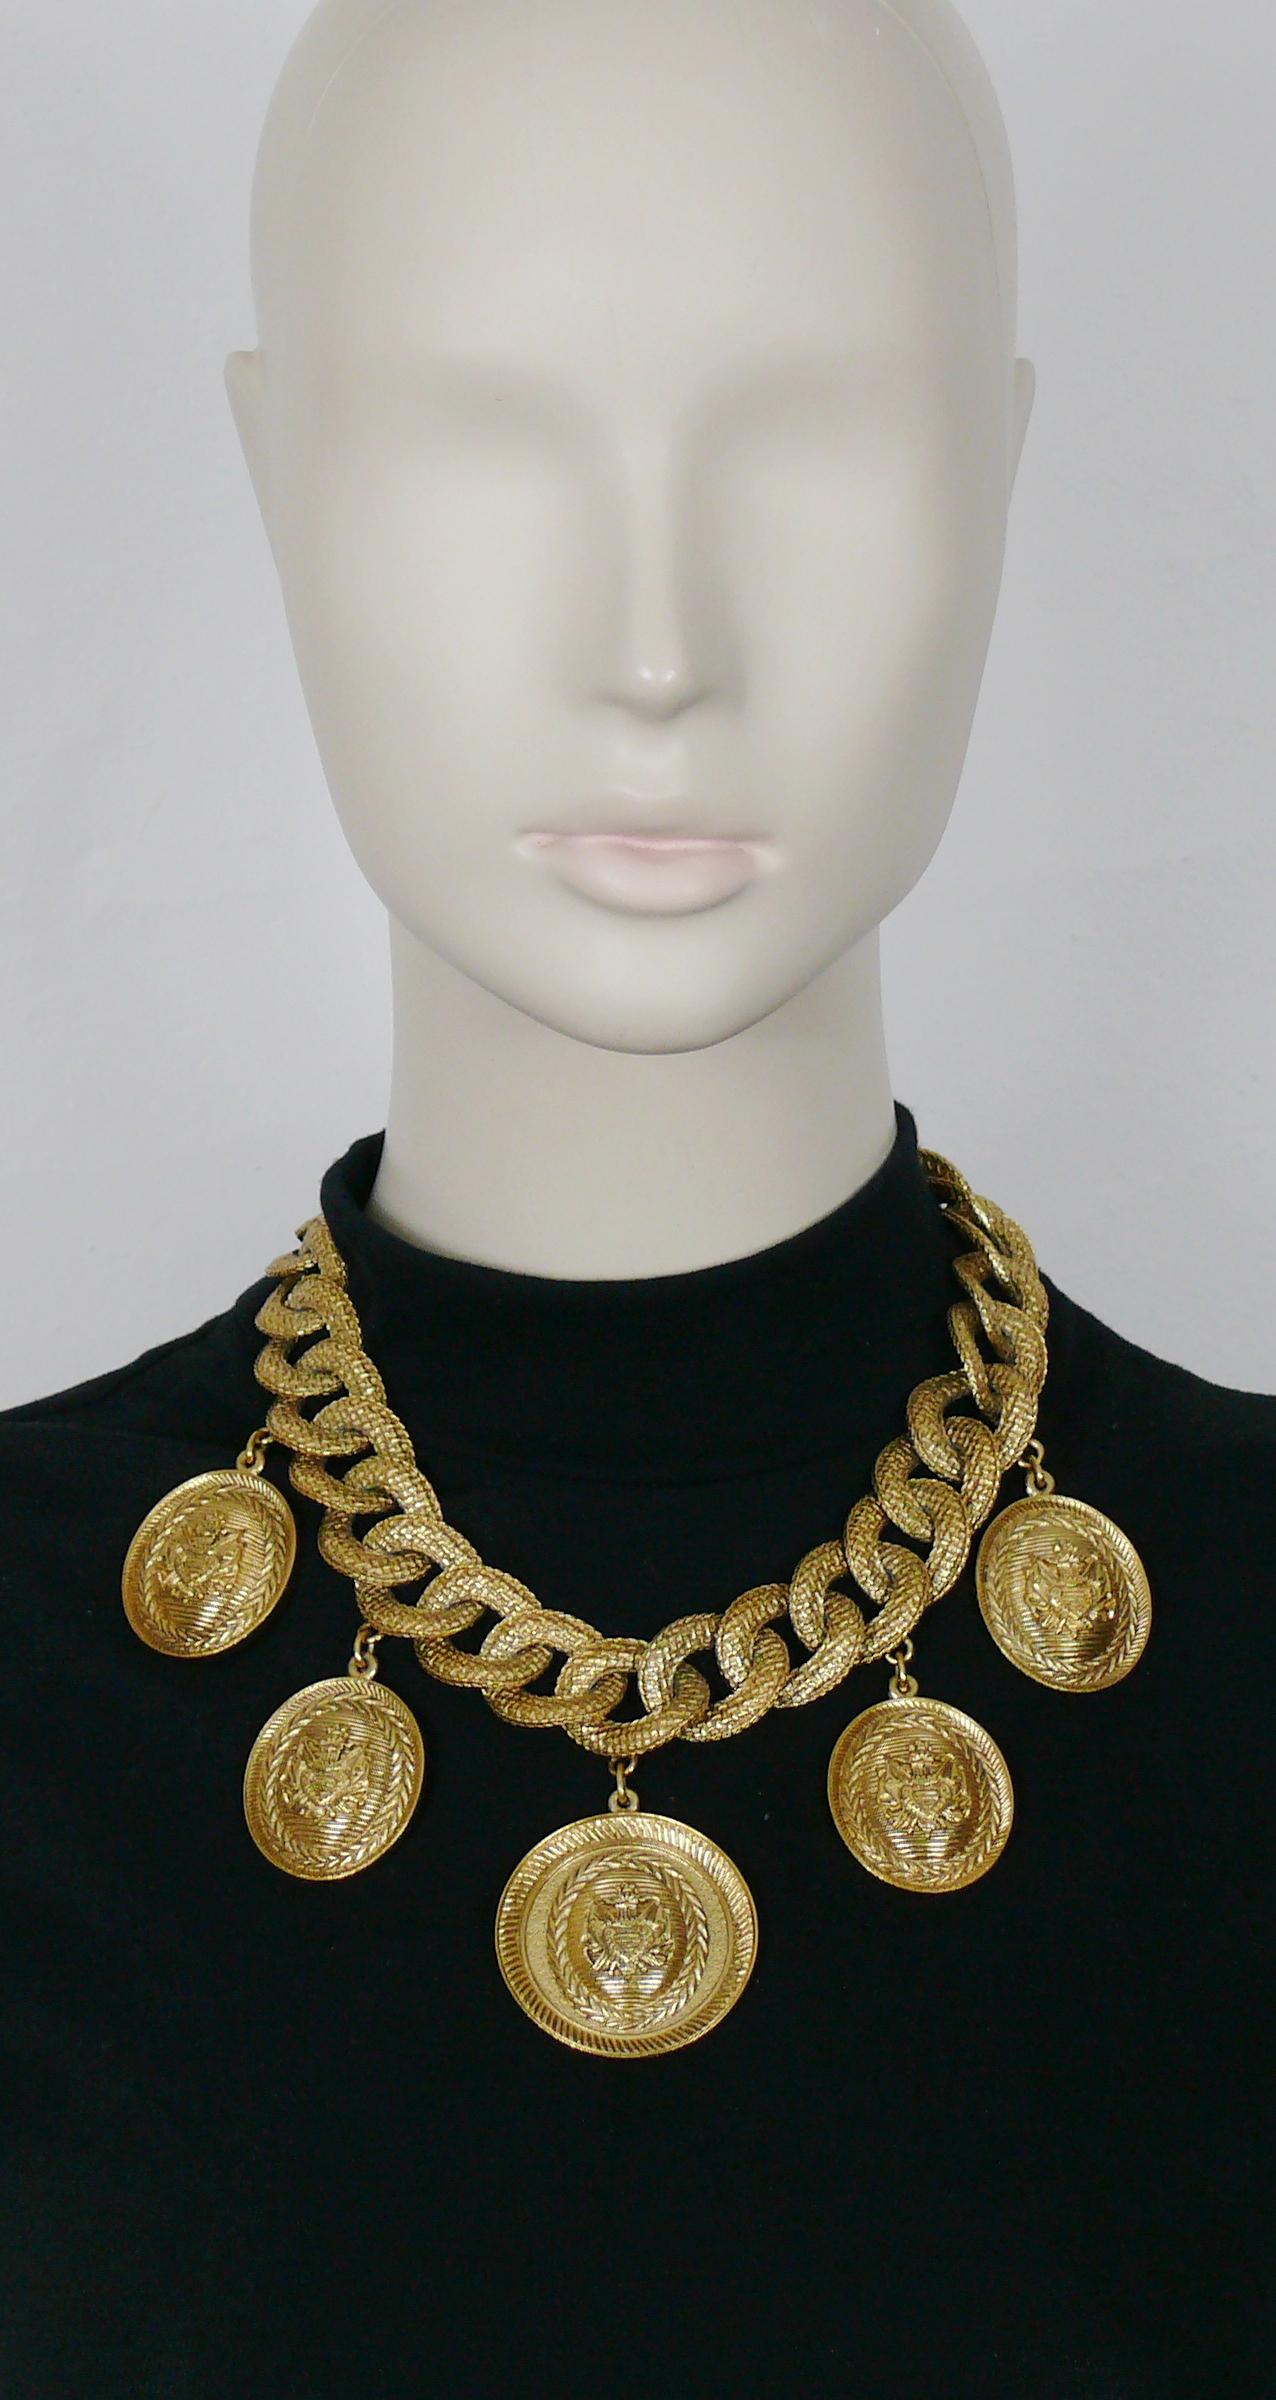 CHRISTIAN DIOR BOUTIQUE by GIANFRANCO FERRE vintage chunky textured chain necklace featuring five medallion crests.

Gold tone metal hardware.

T-bar and toggle closure.

Embossed CHRISTIAN DIOR BOUTIQUE.

Indicative measurements : length approx. 46